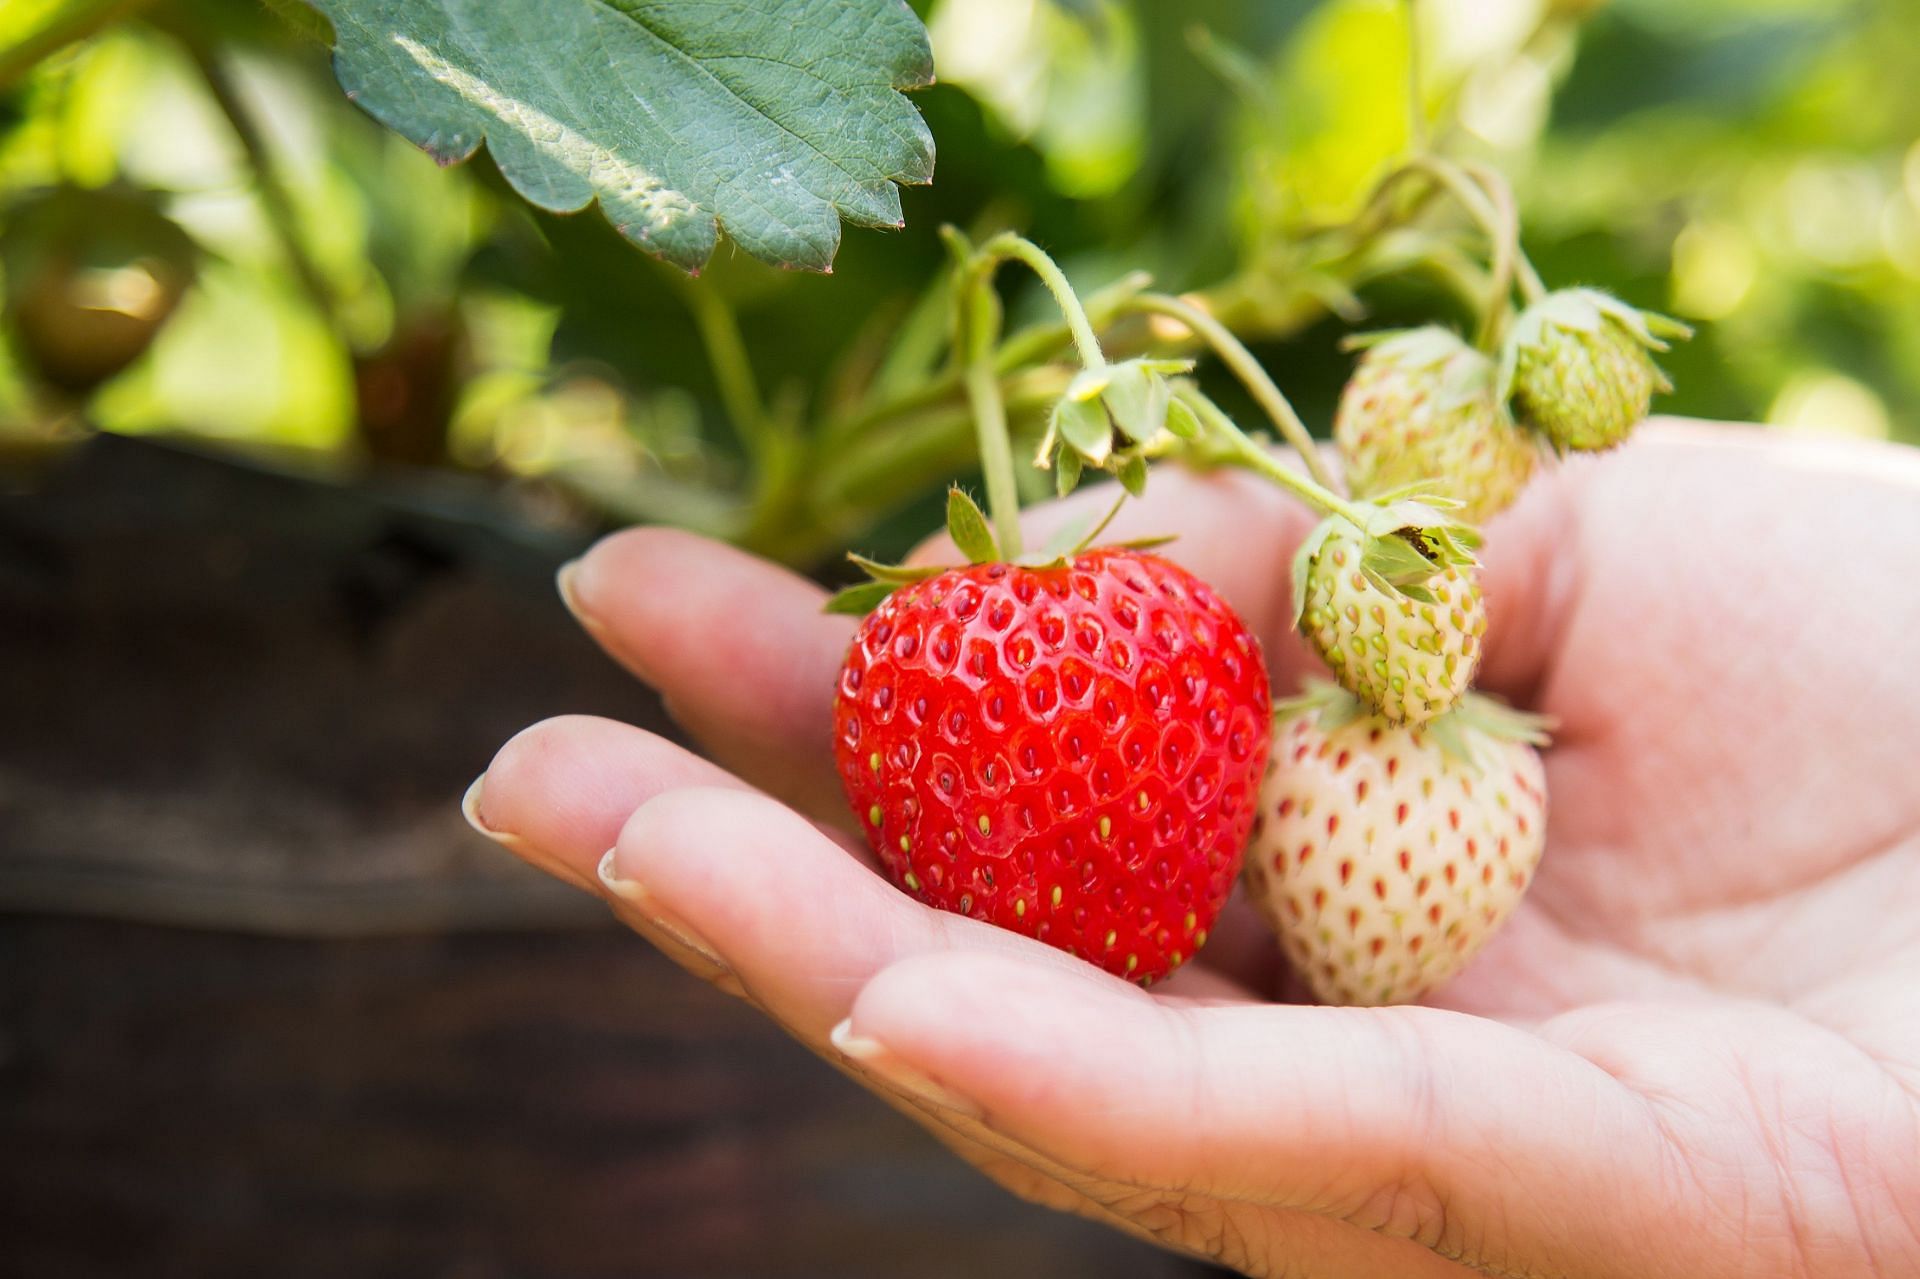 Strawberries are rich in antioxidants and vitamin C. (Image via Pexels/Aphiwat Chuangchoem)